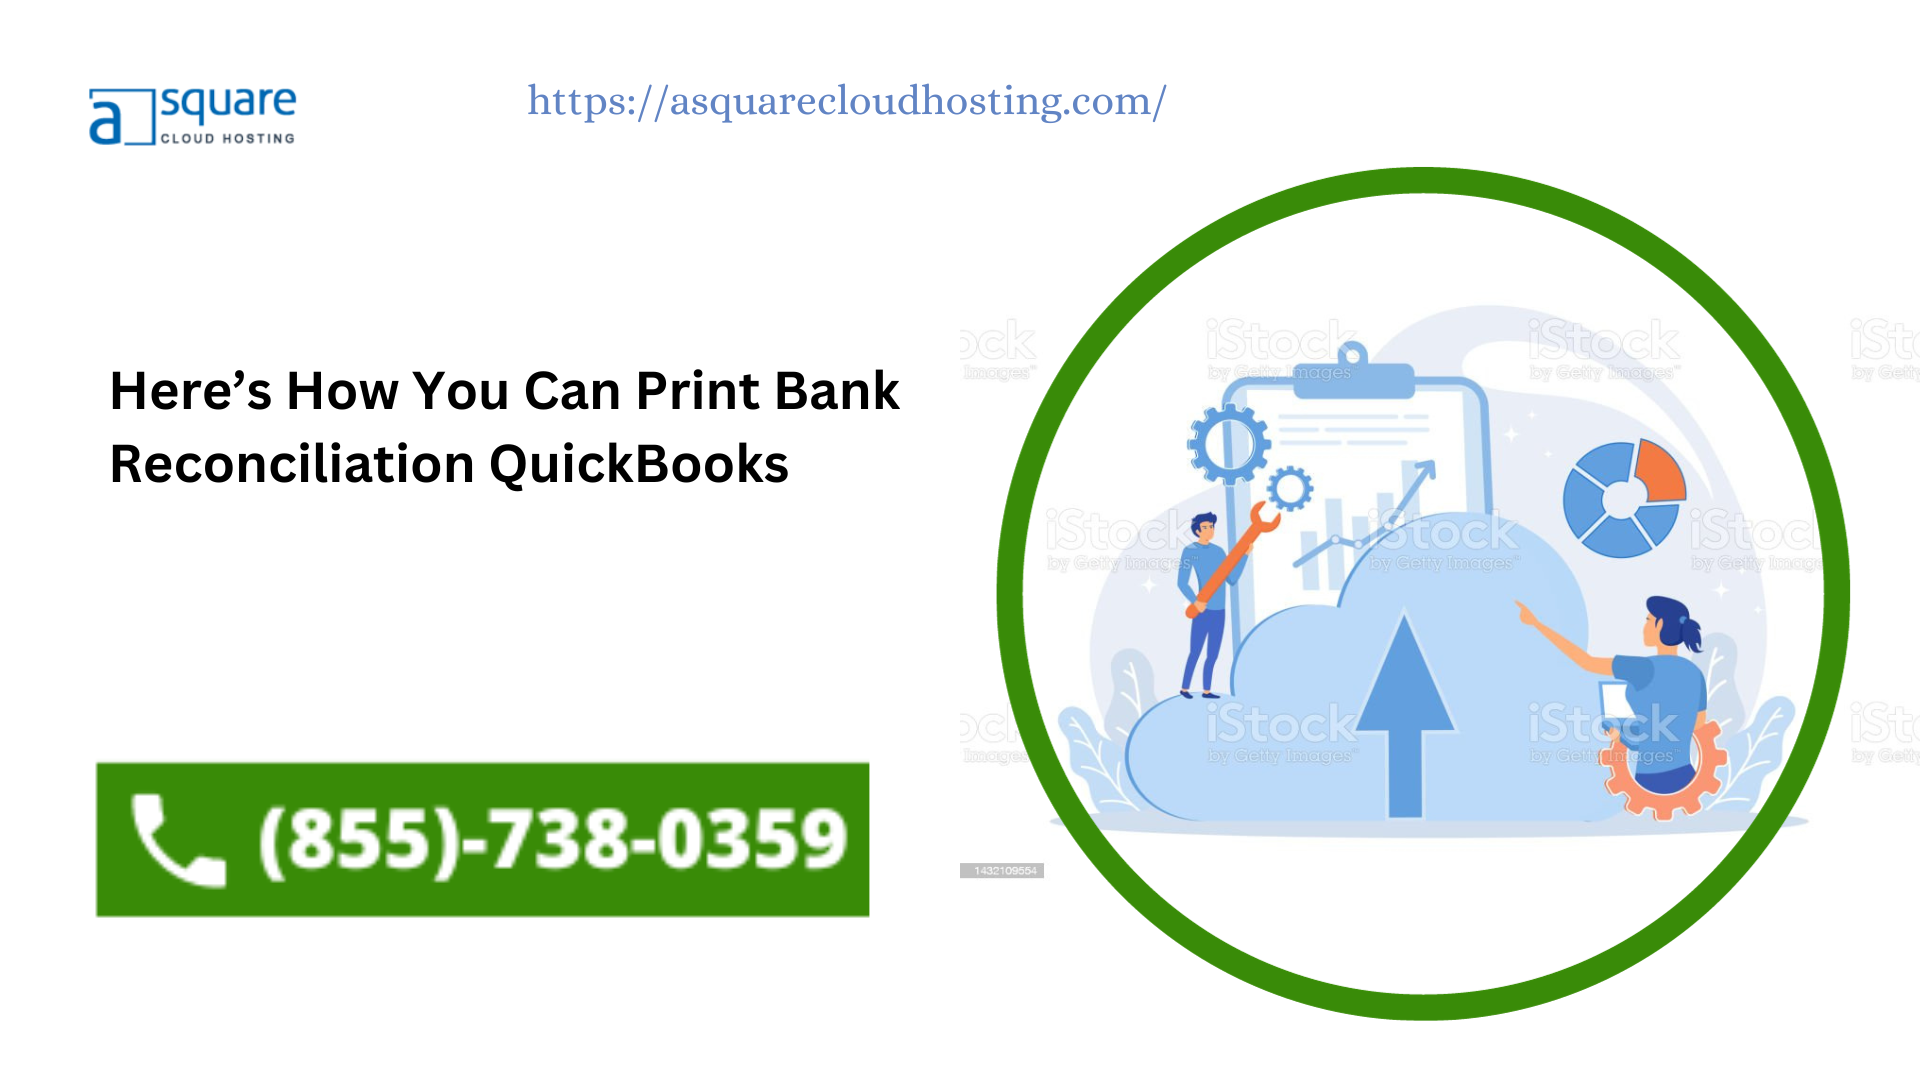 Here’s How You Can Print Bank Reconciliation QuickBooks